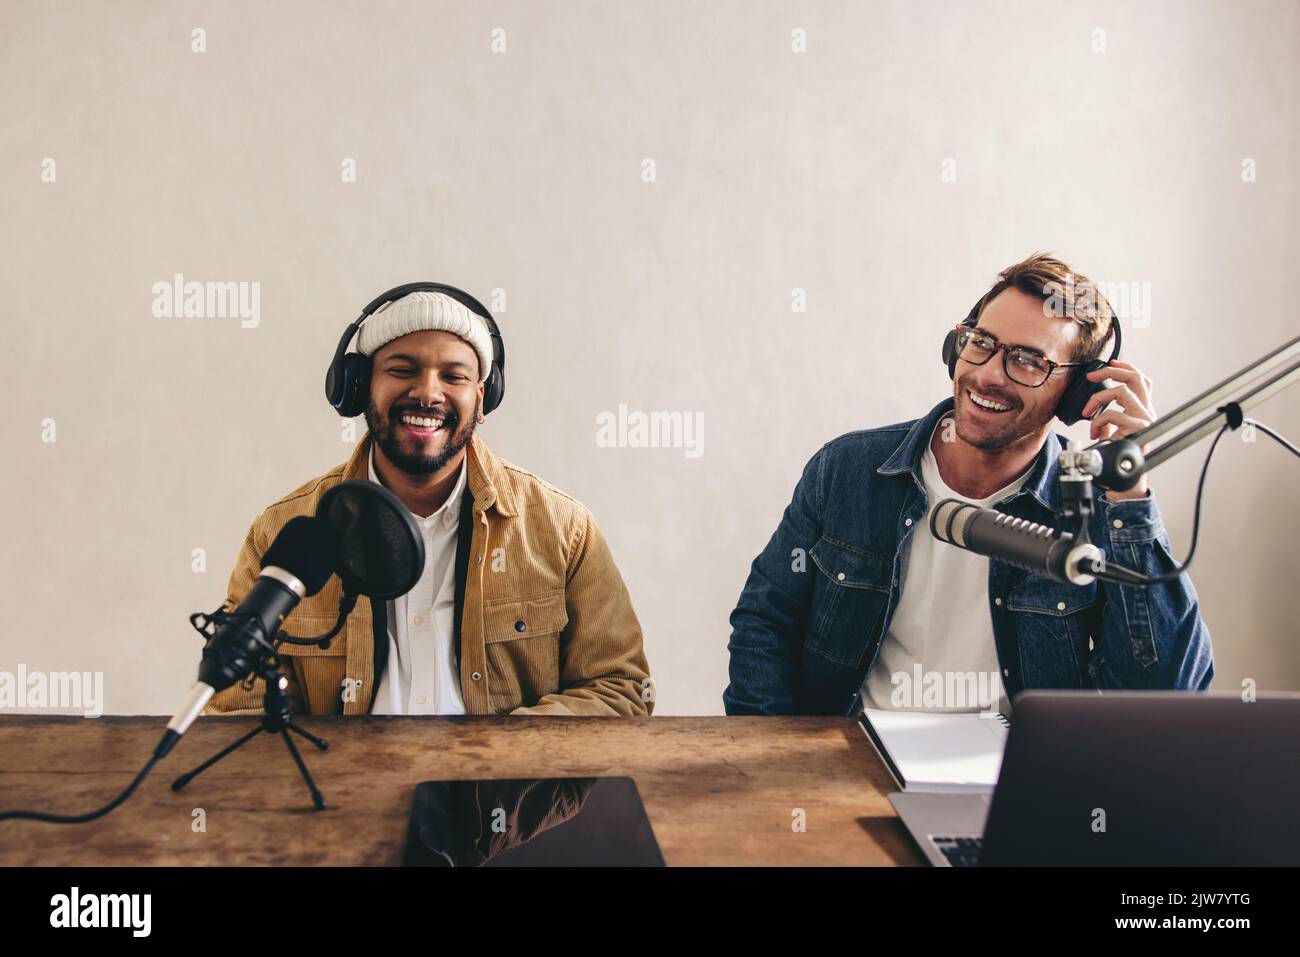 Two happy radio presenters having a good time on air. Young men smiling happily while recording an audio broadcast in a studio. Cheerful content creat Stock Photo